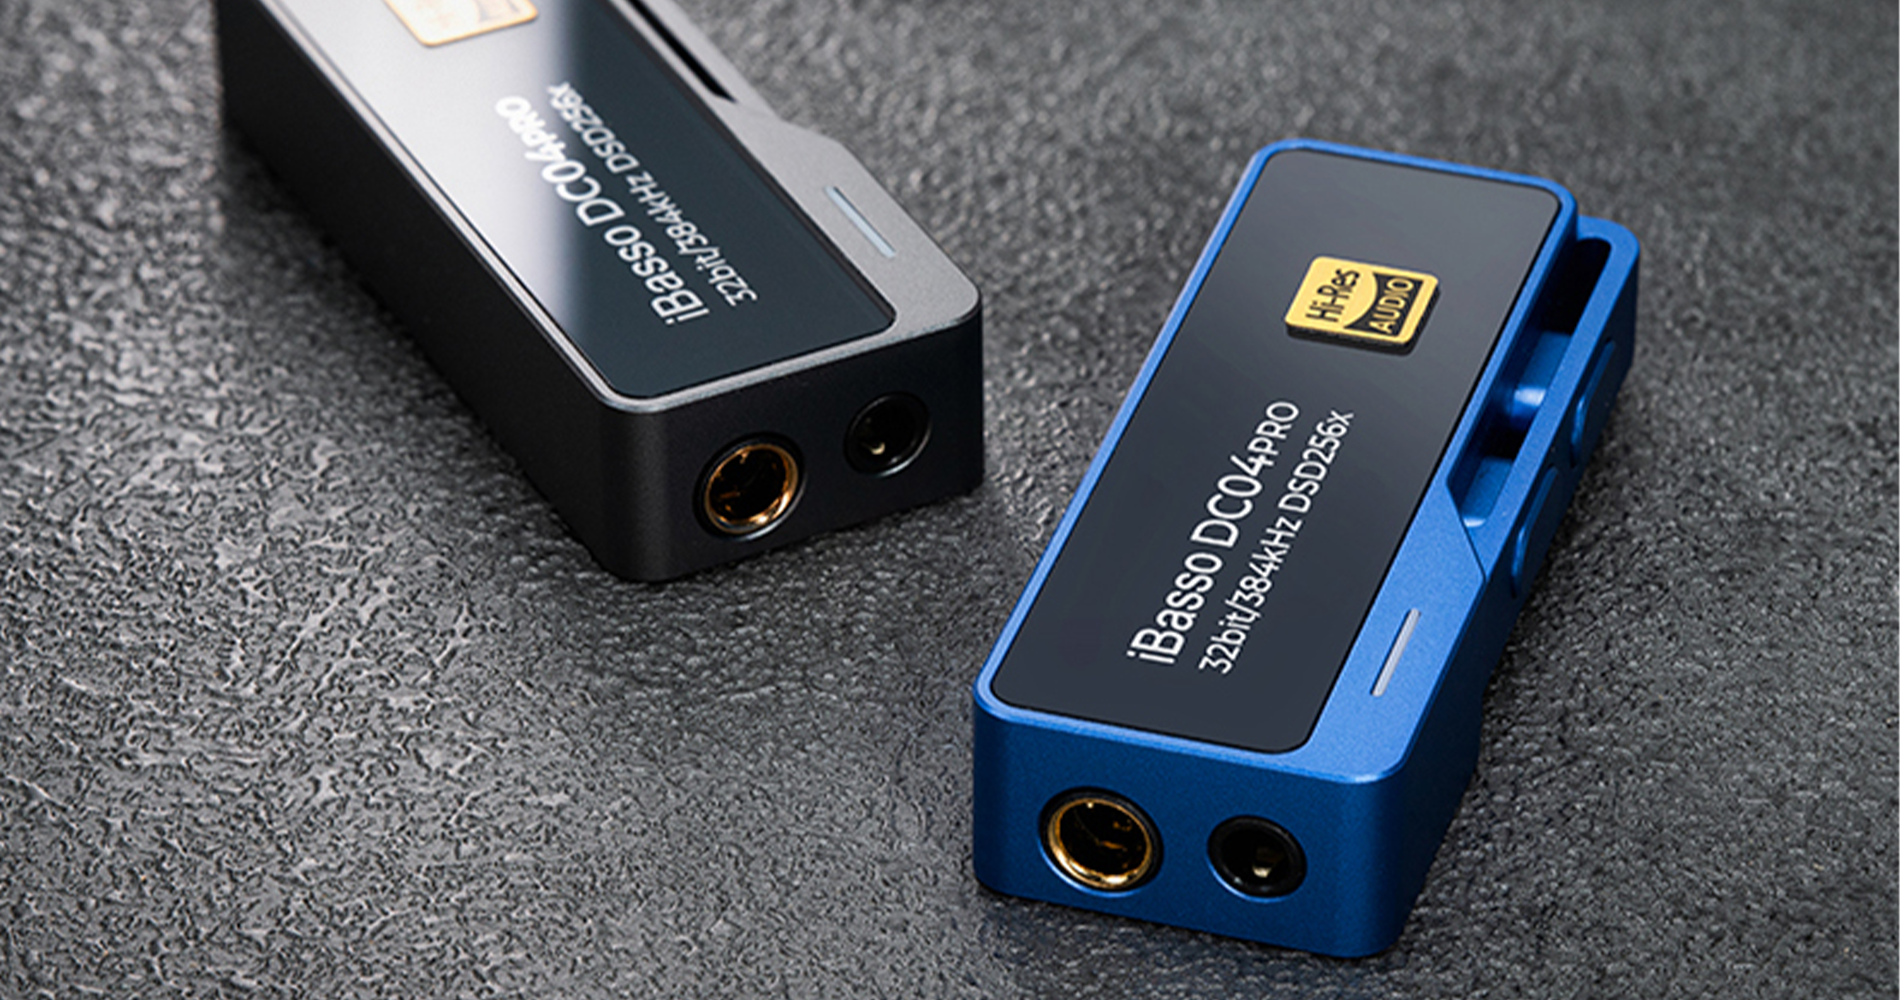 iBasso DC04PRO Portable USB DAC/Amp Overview